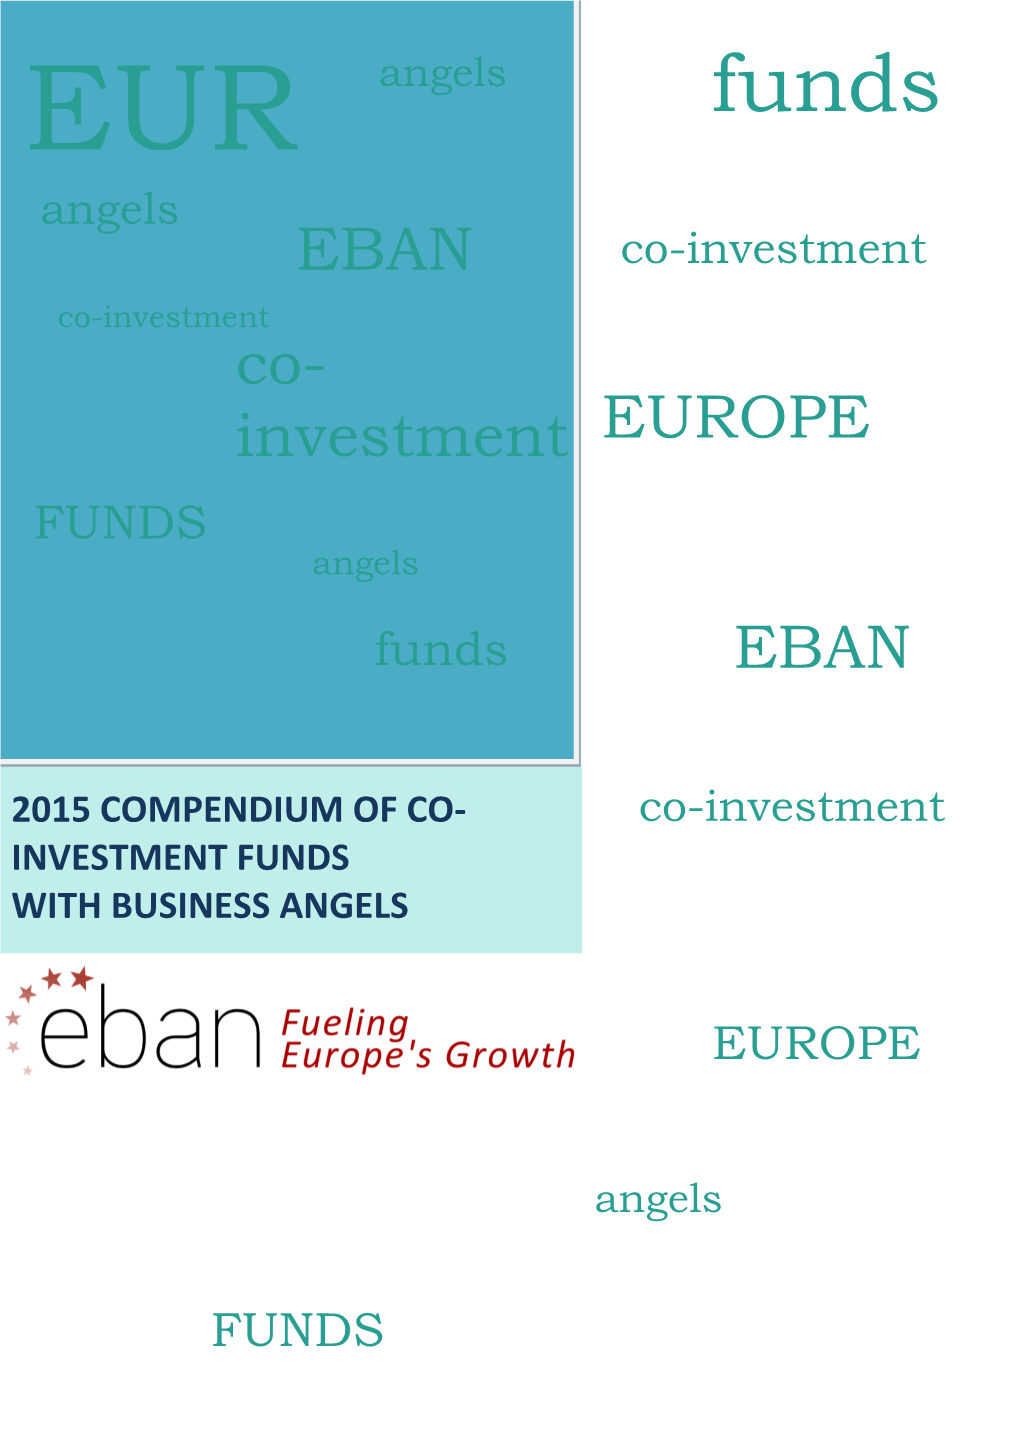 Annual Compendium of Co-Investment Funds